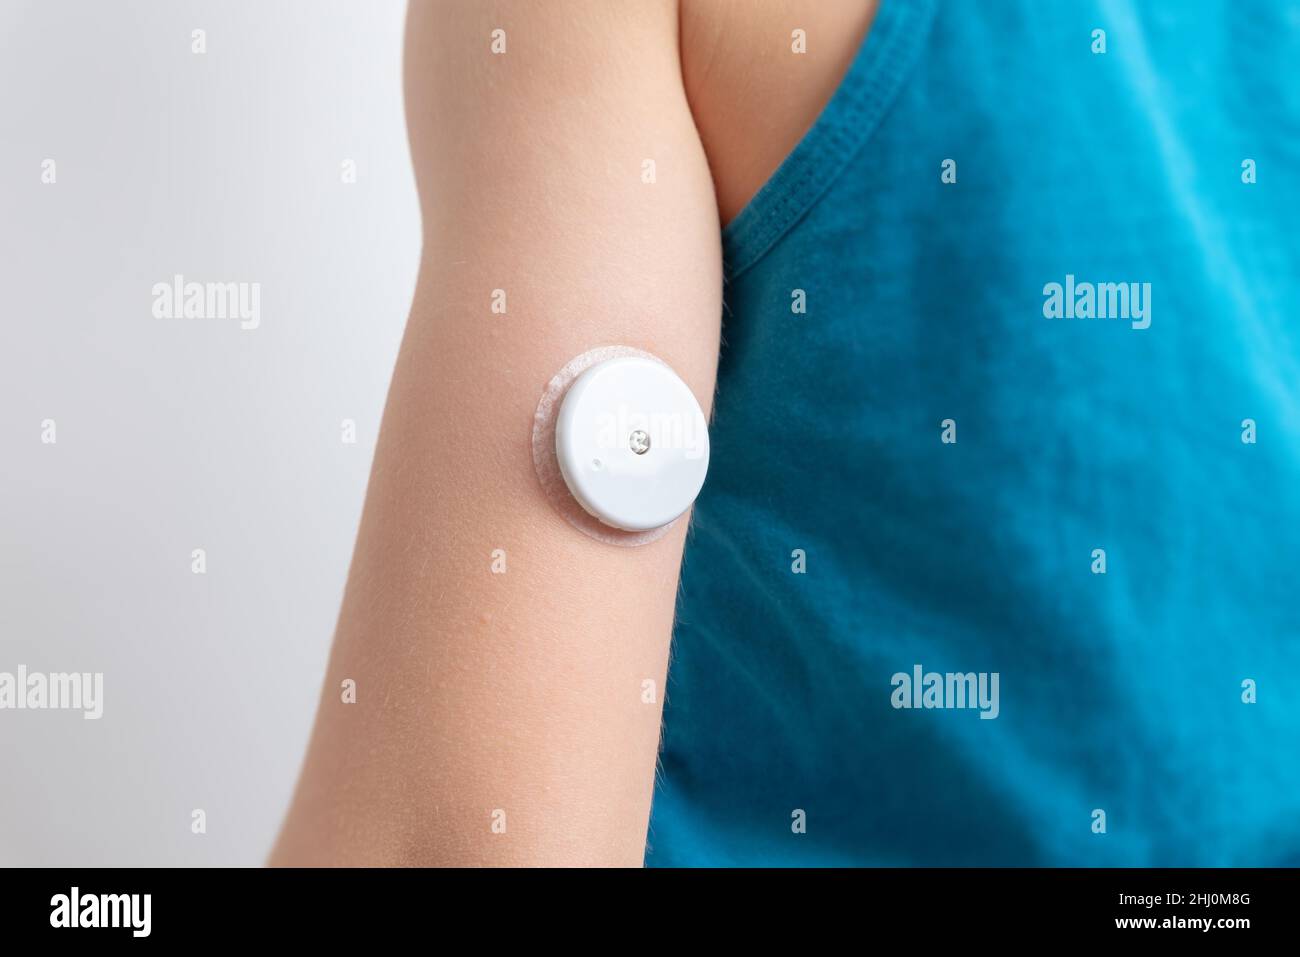 Blood glucose sensor on a child's arm.  Sensor for remote measurement of blood glucose levels using NFC technology on a mobile phone or reader Stock Photo